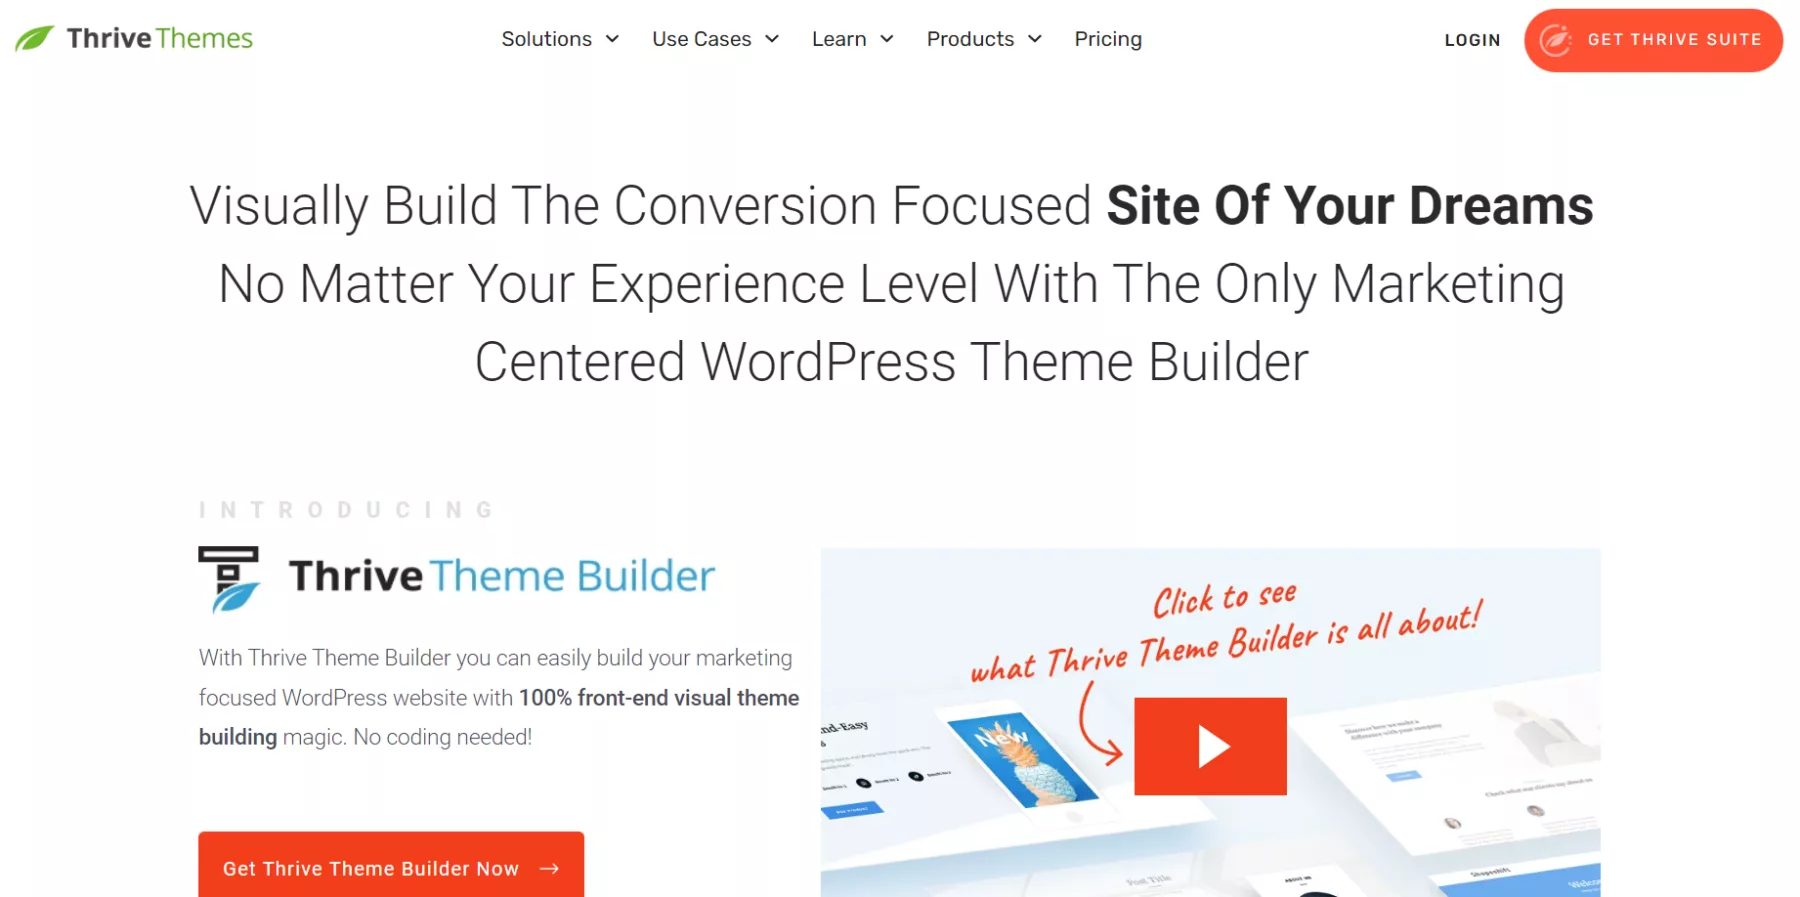 thrive theme builder review